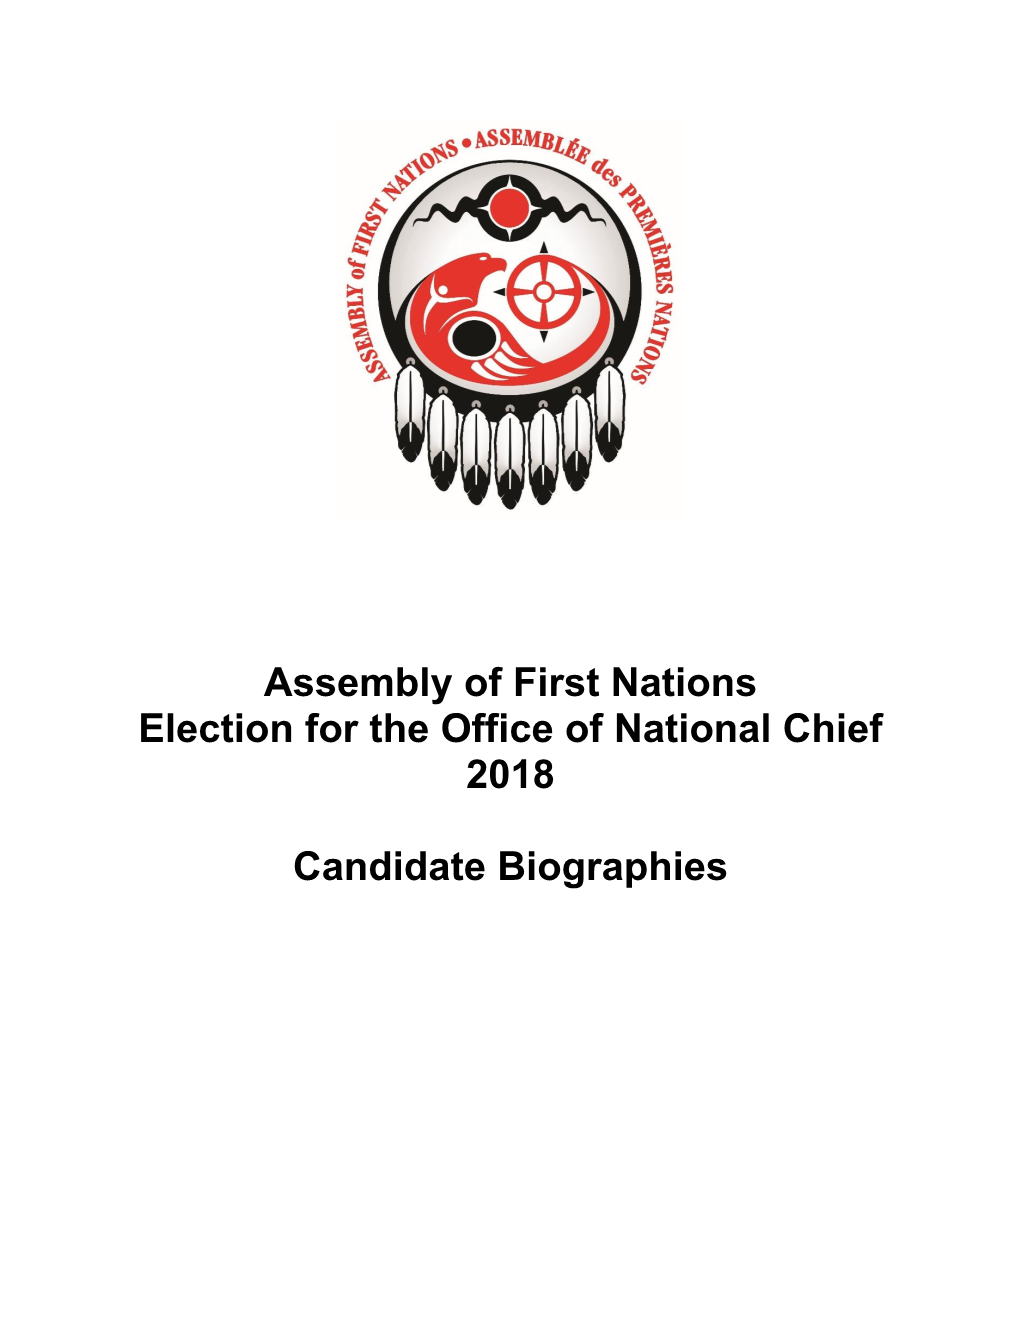 Assembly of First Nations Election for the Office of National Chief 2018